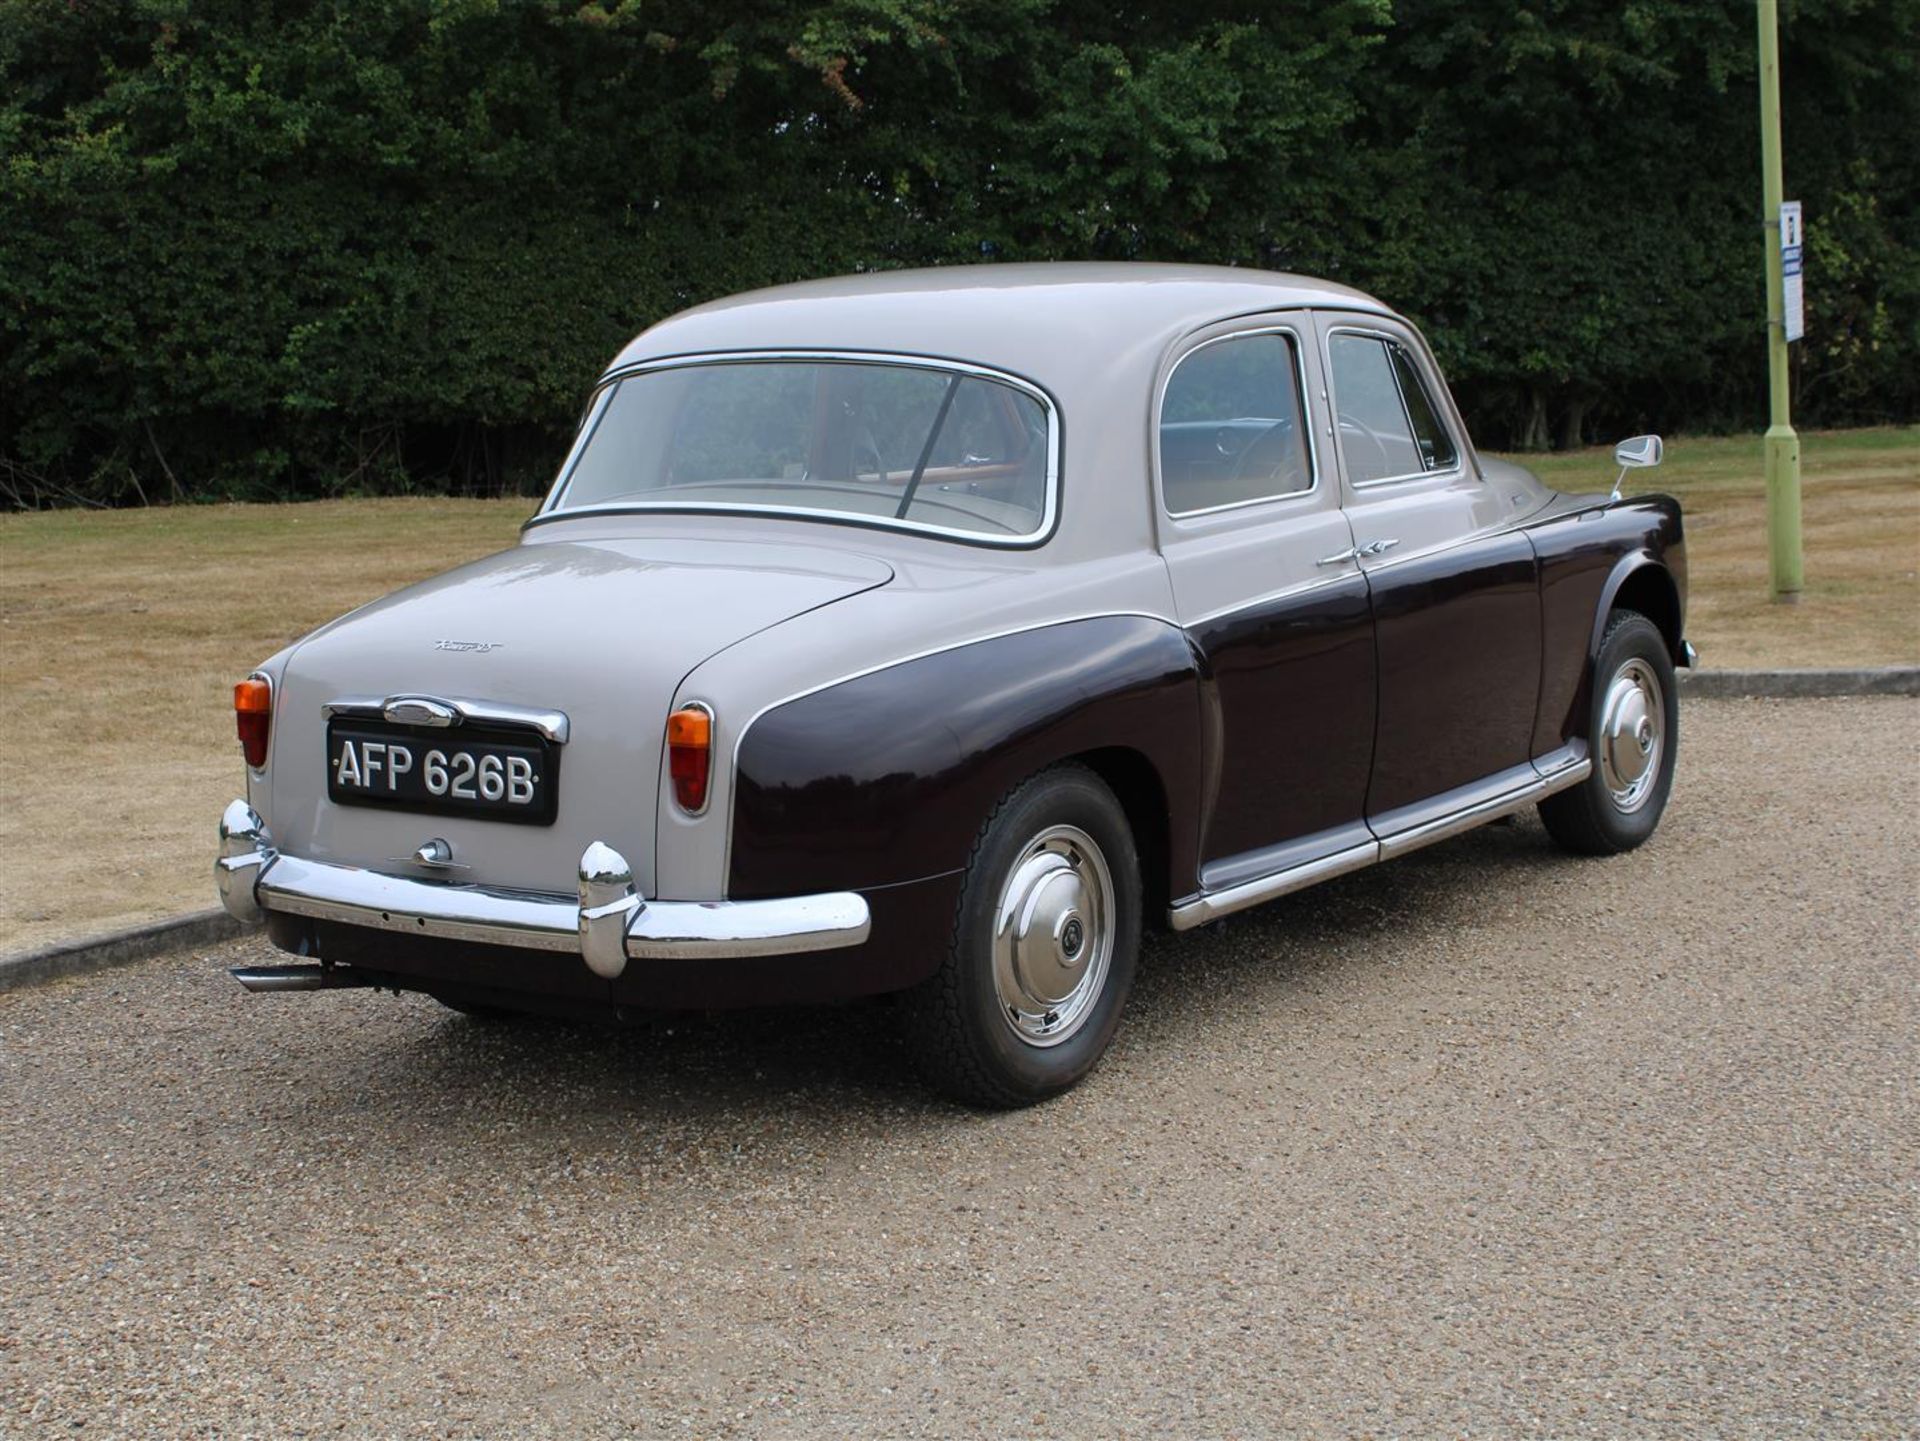 1964 Rover P4 95 Saloon - Image 6 of 23